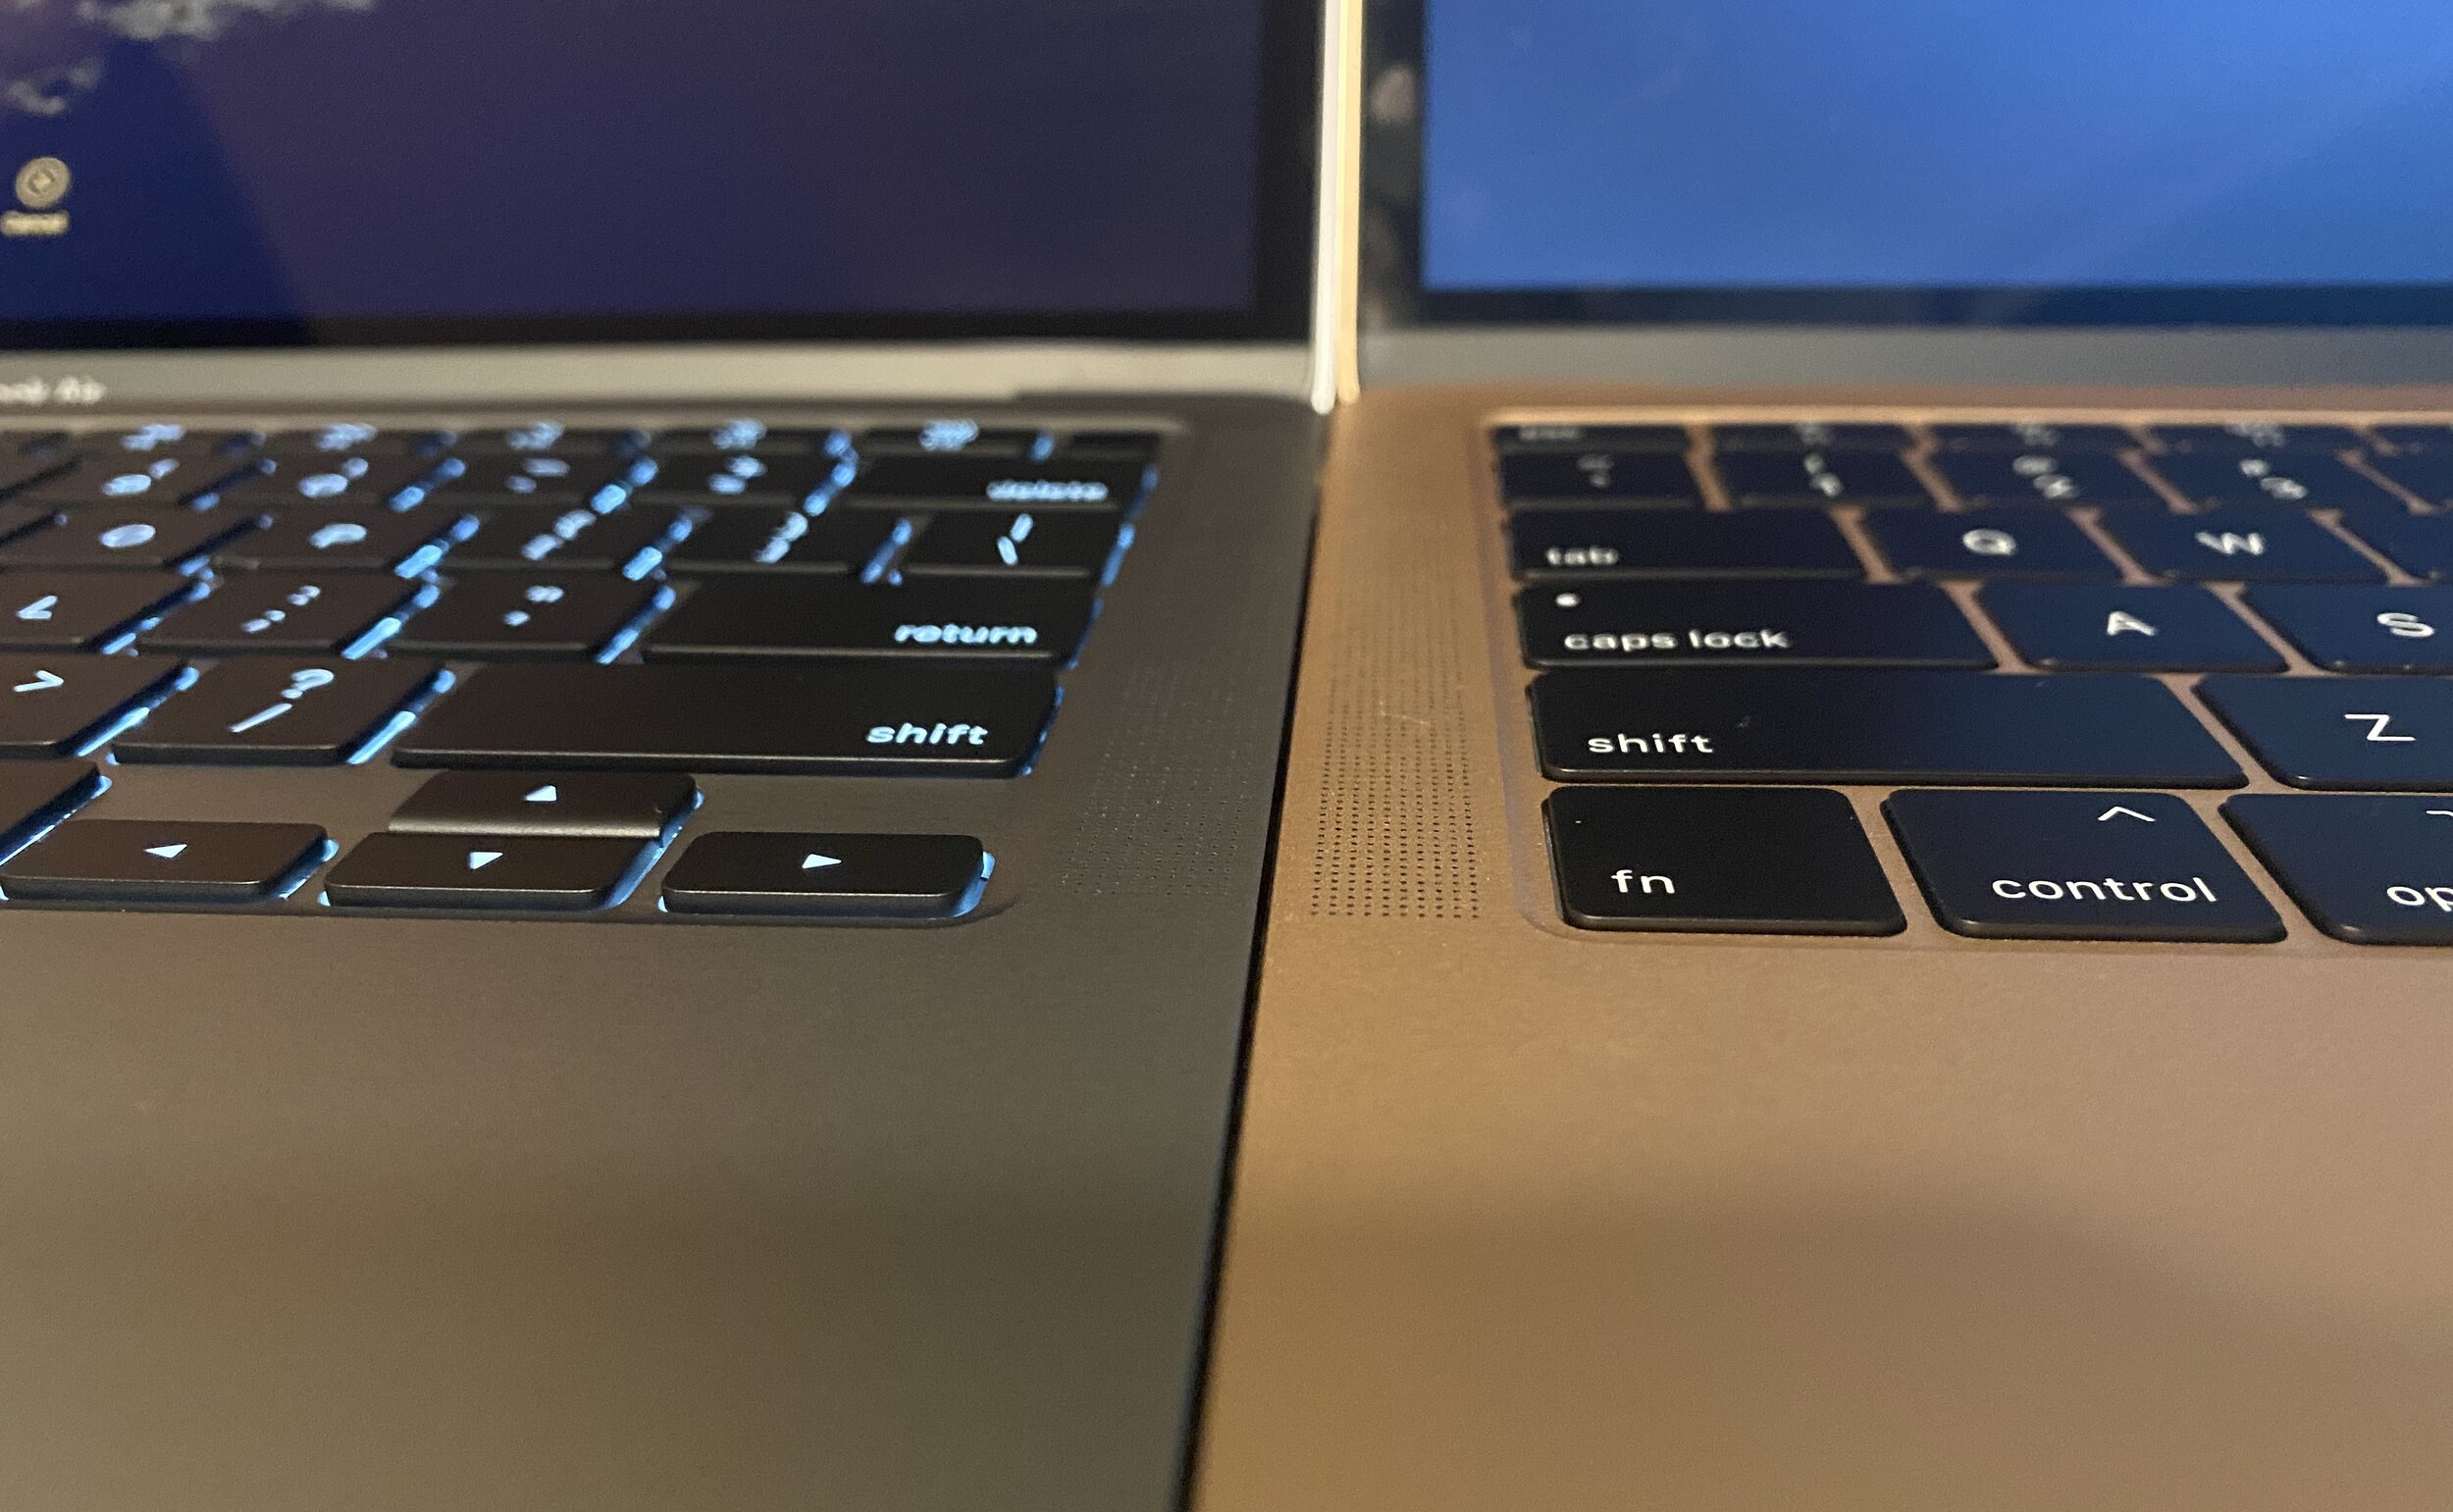 The keyboard is the most obvious physical difference